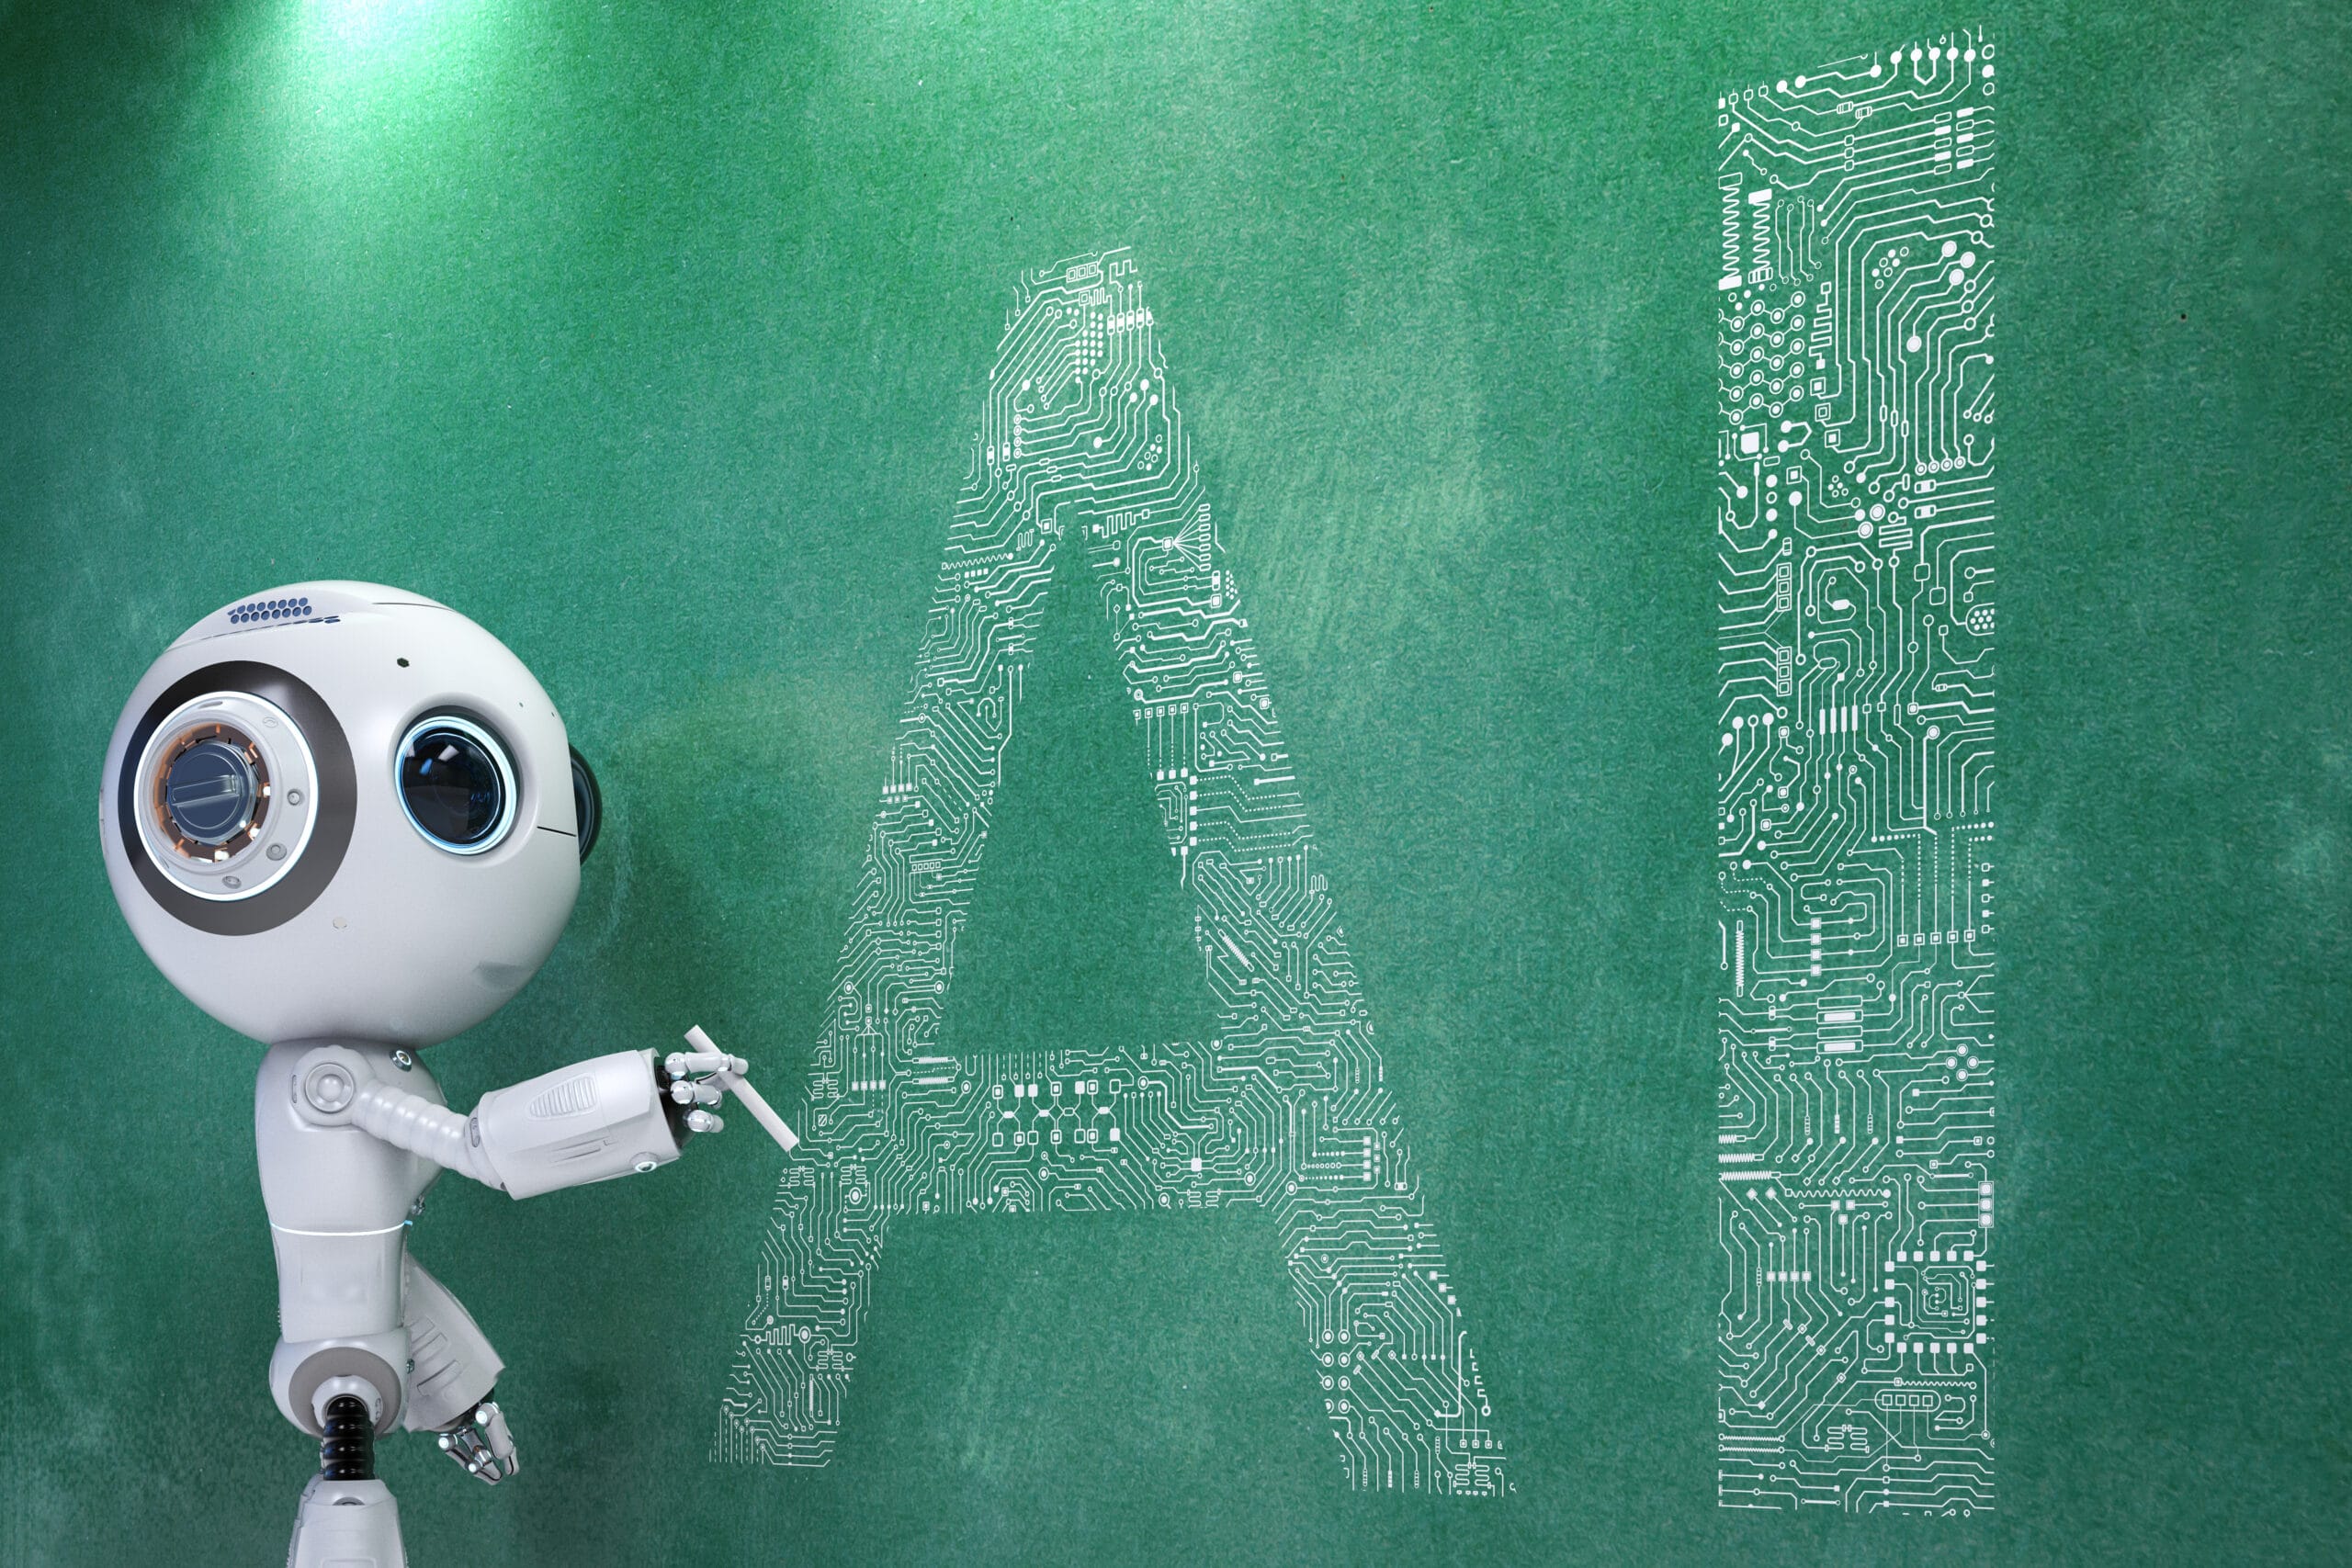 Reinforcing education in the AI era